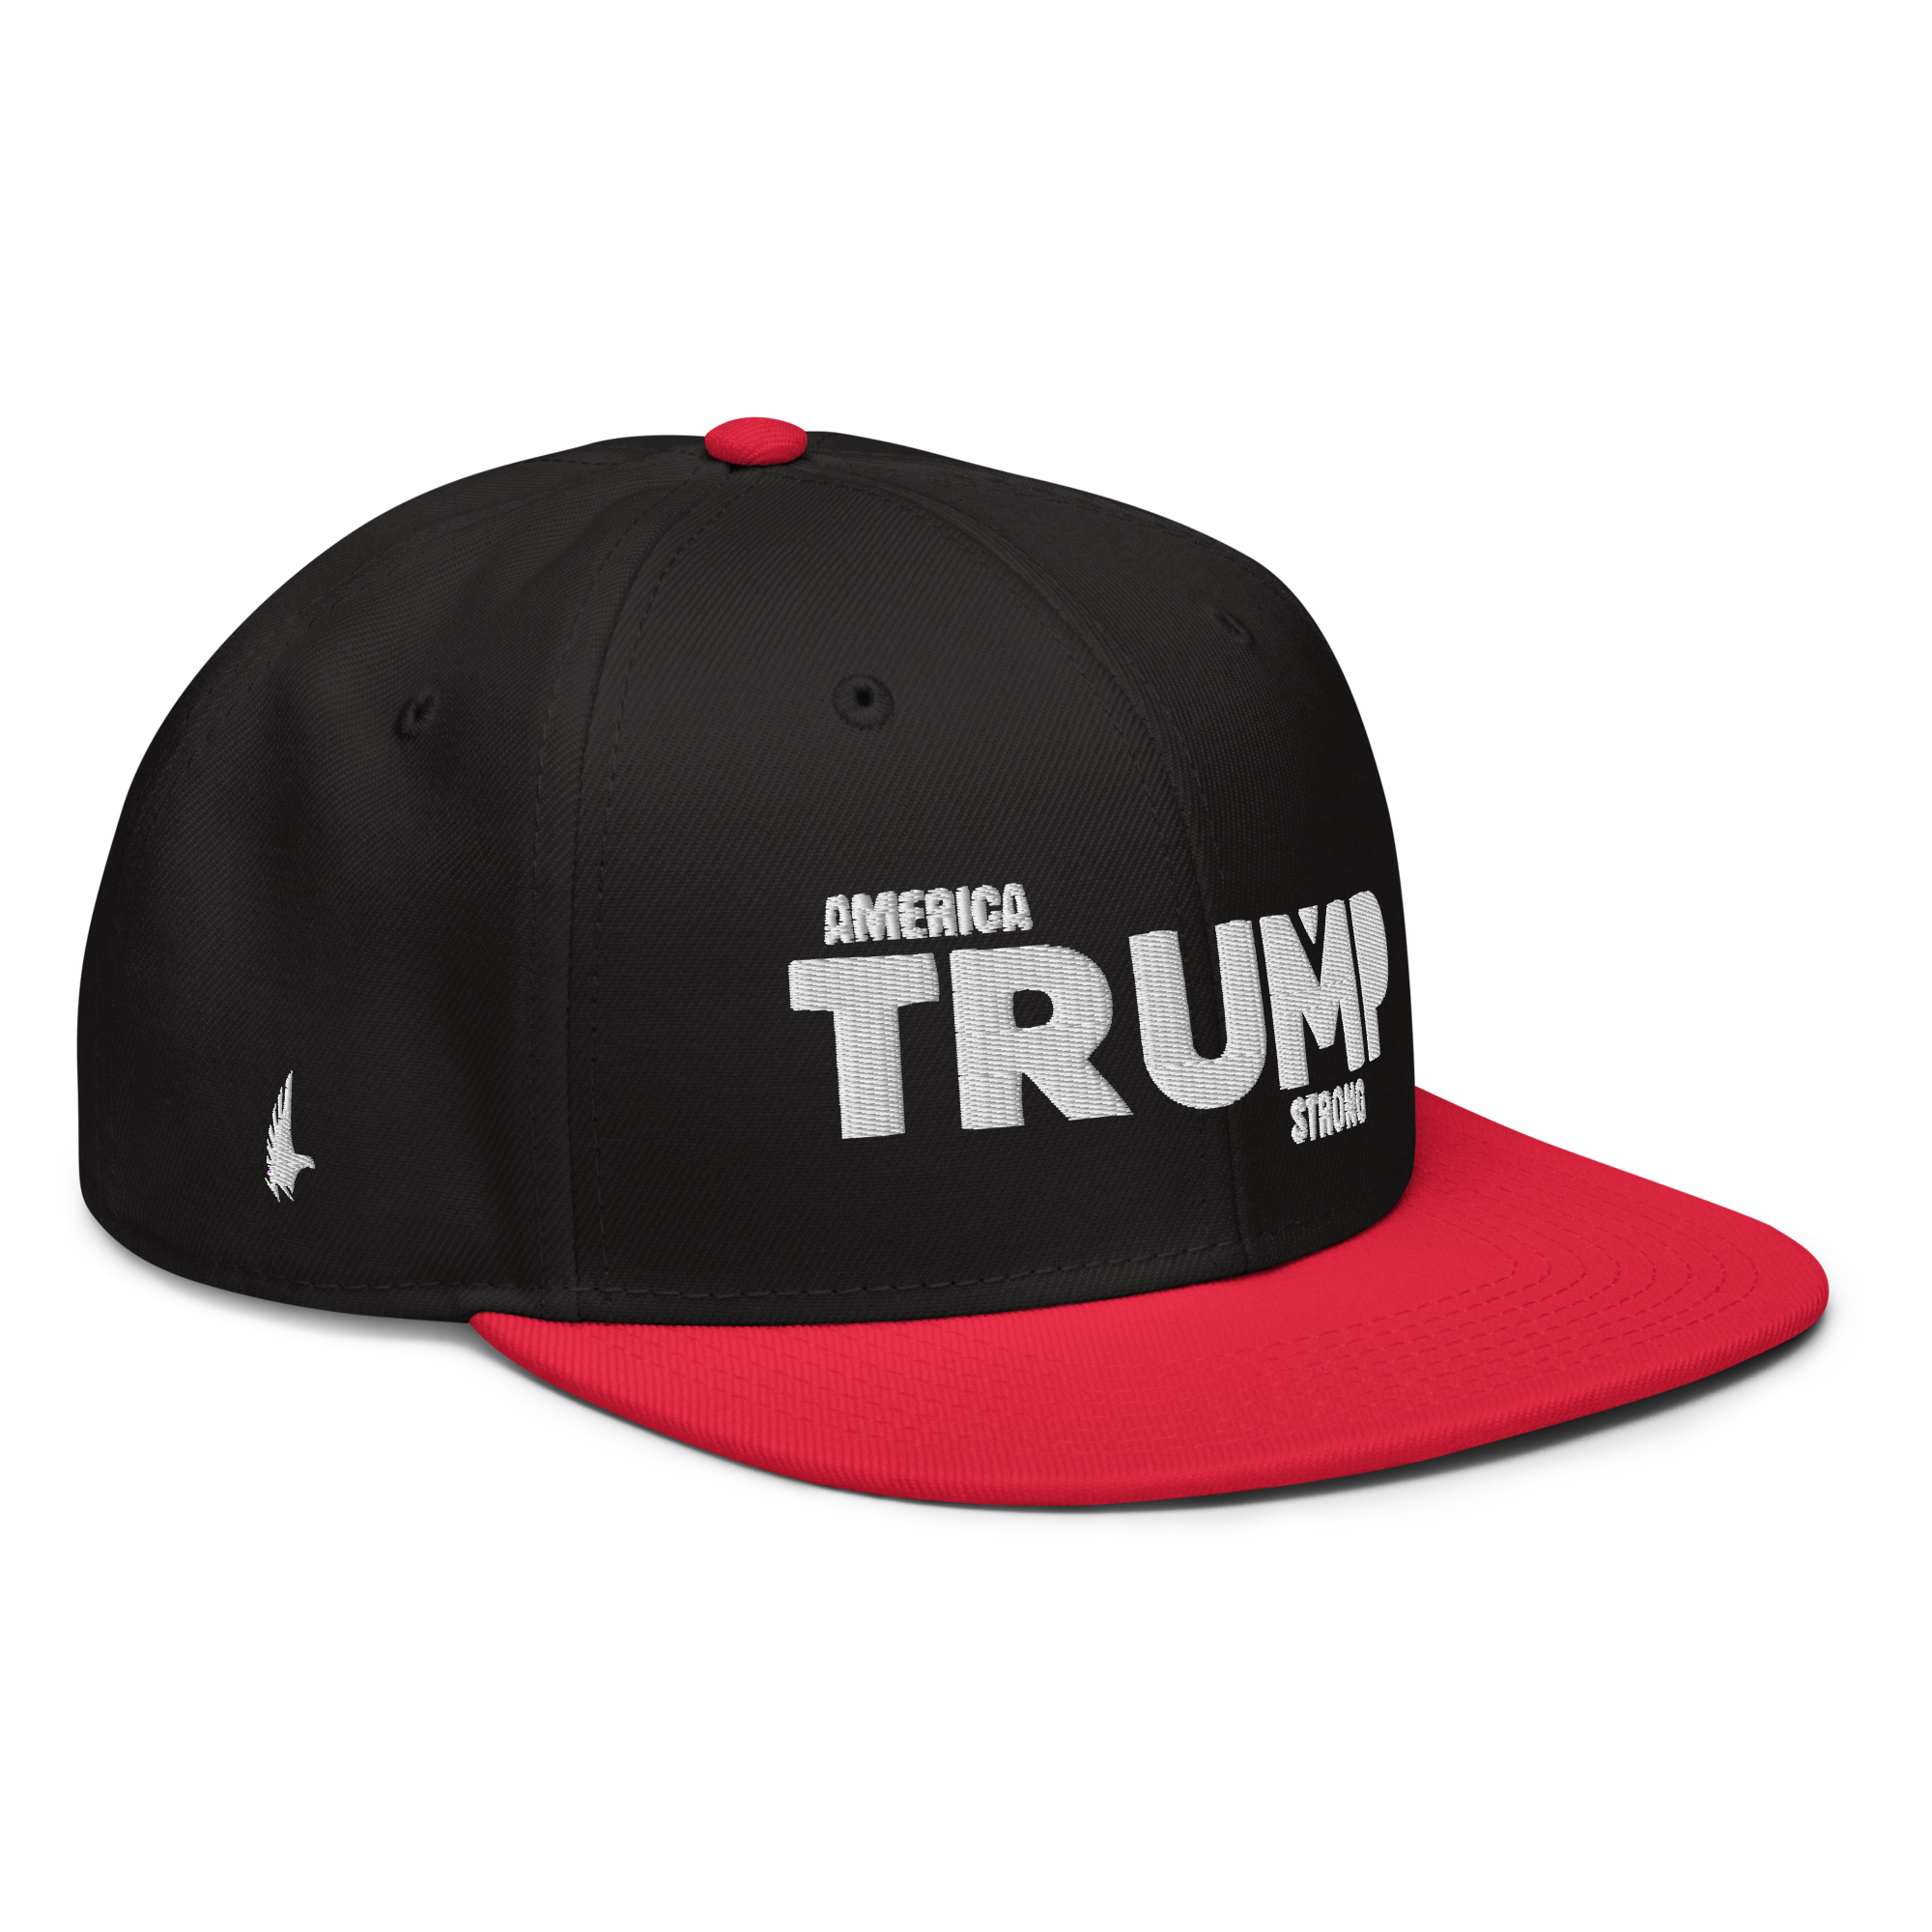 Loyalty Vibes America Trump Strong Snapback Hat Black White Red One size - Loyalty Vibes